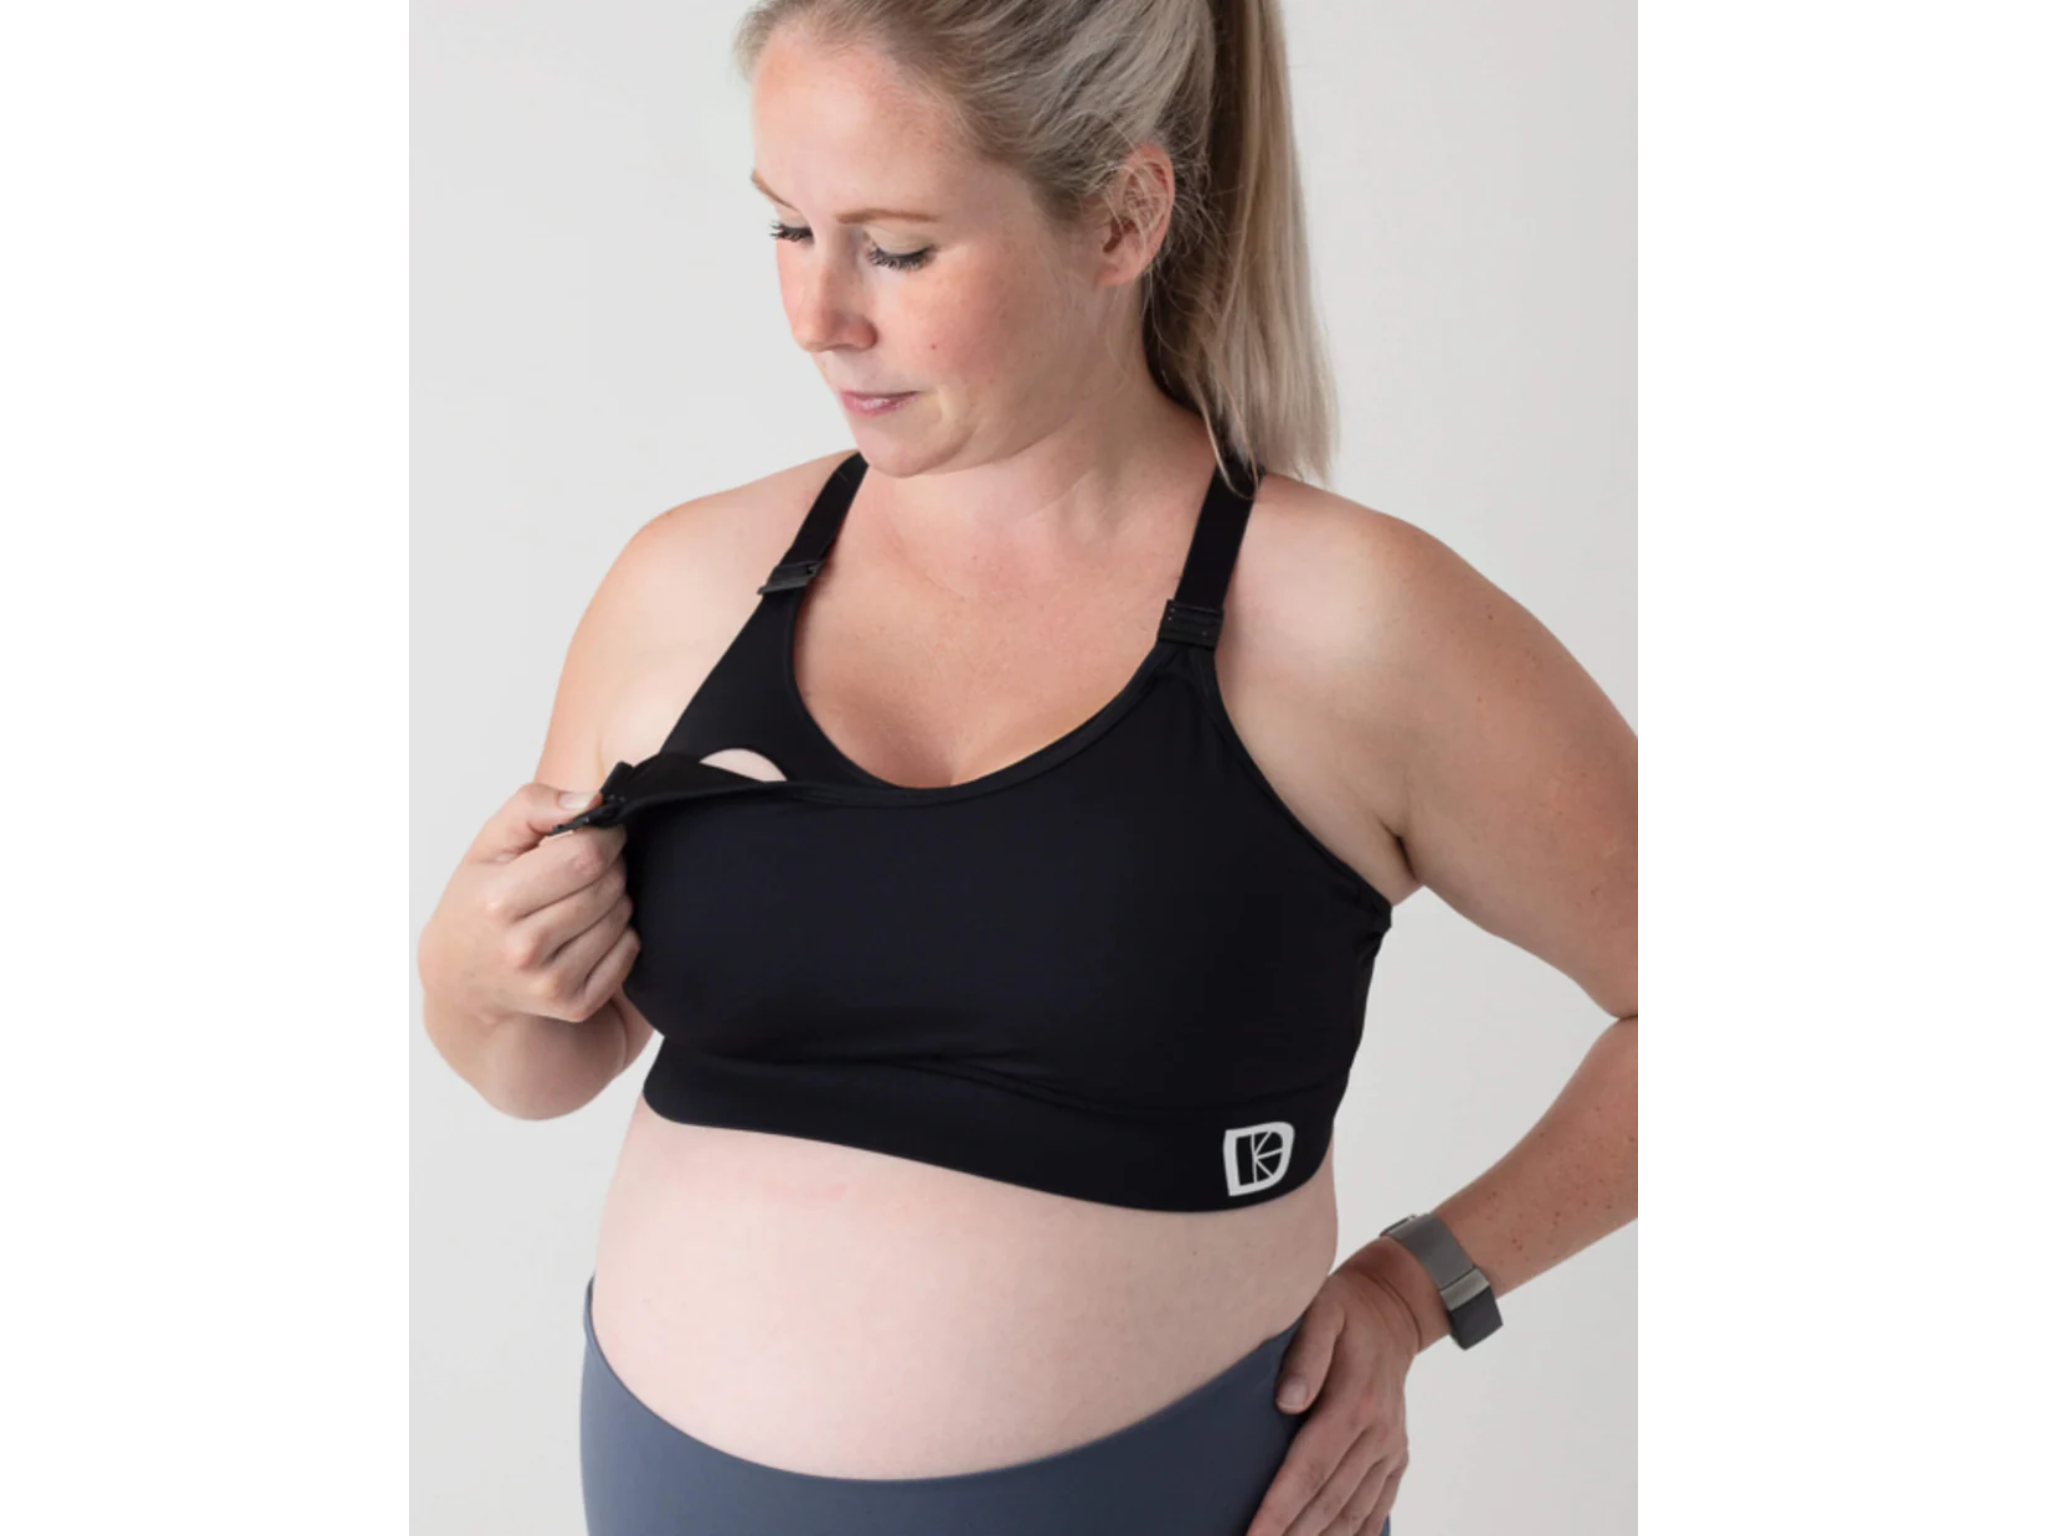 Maternity Pullover Clothing Sports Bras.